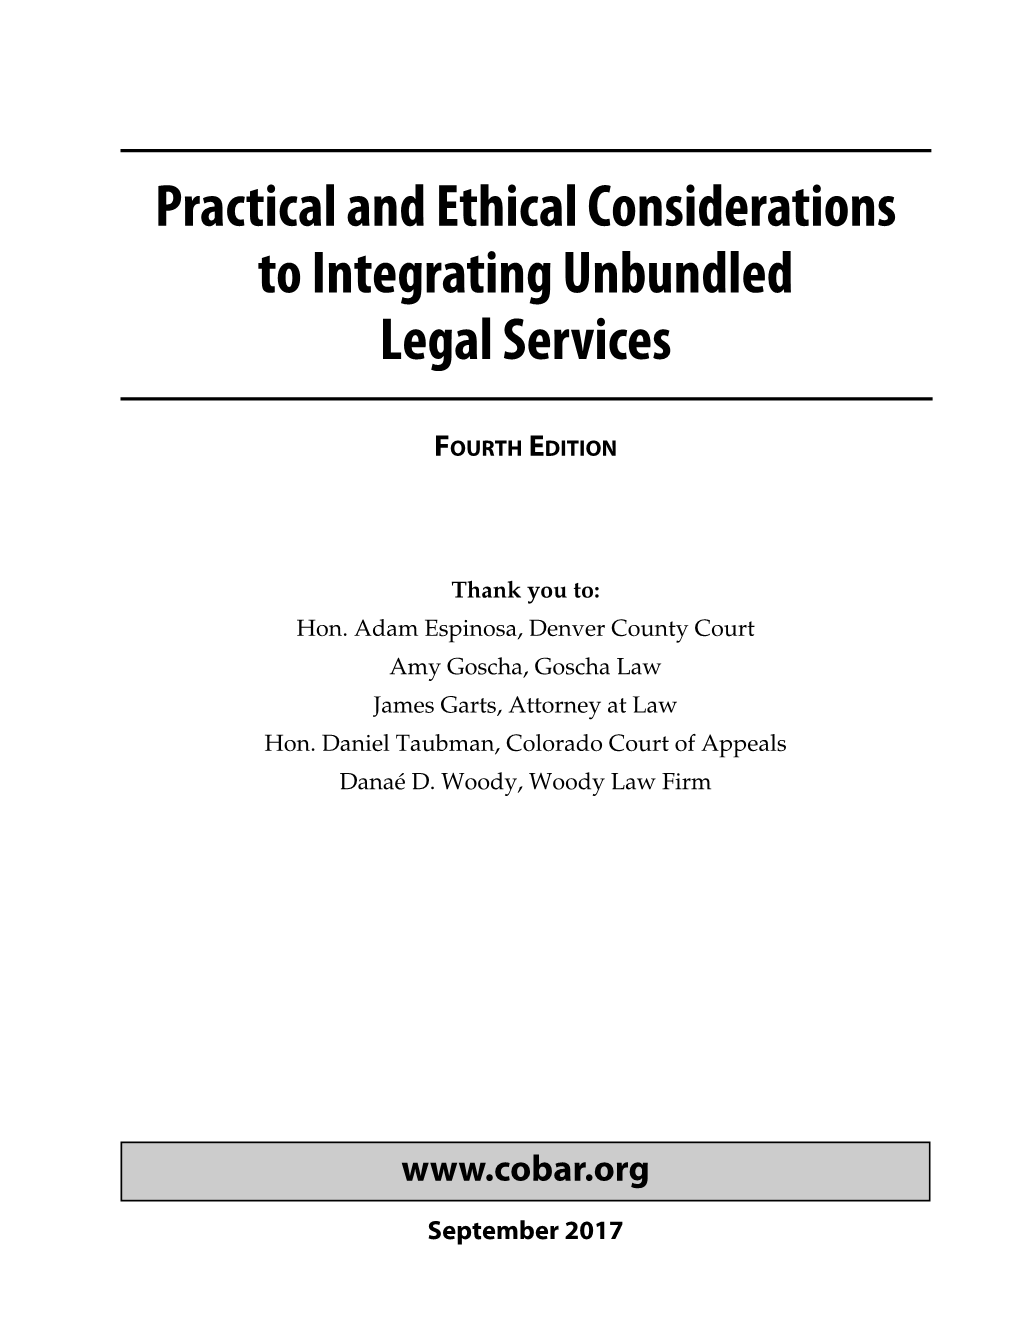 Practical and Ethical Considerations to Integrating Unbundled Legal Services